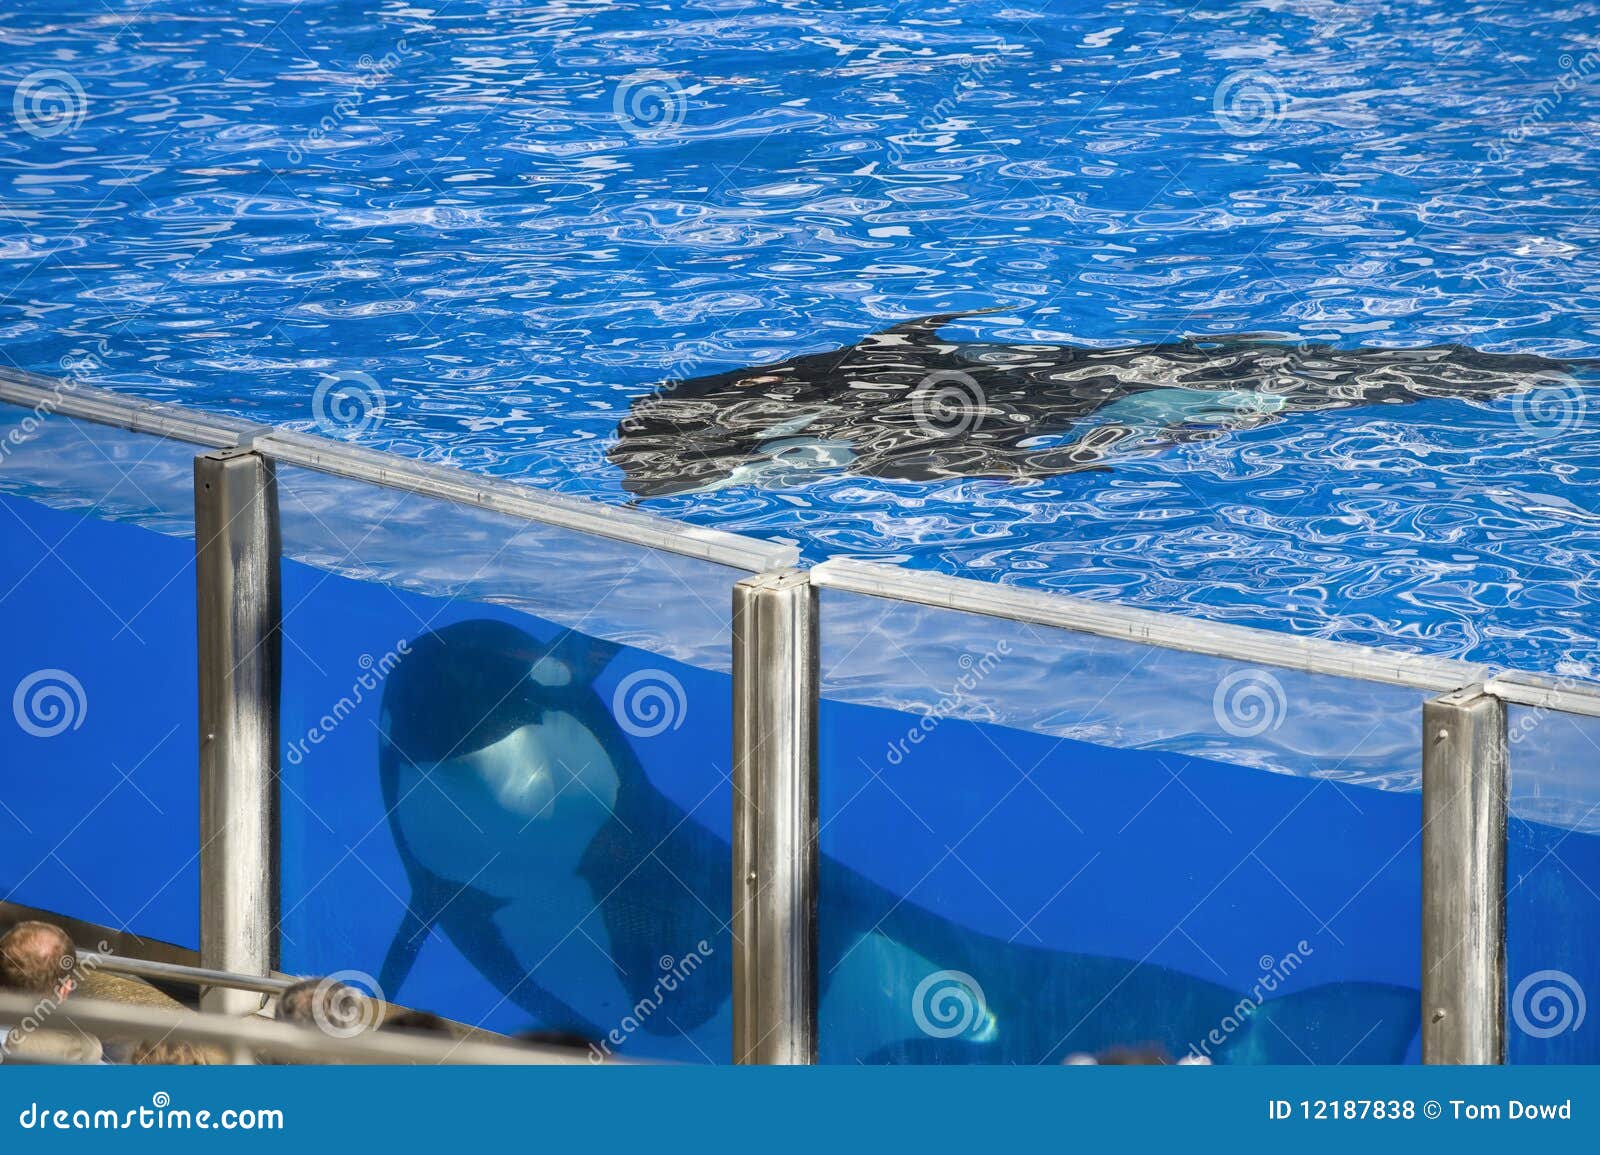 Whale in large tank stock photo. Image of undersea, whale - 12187838